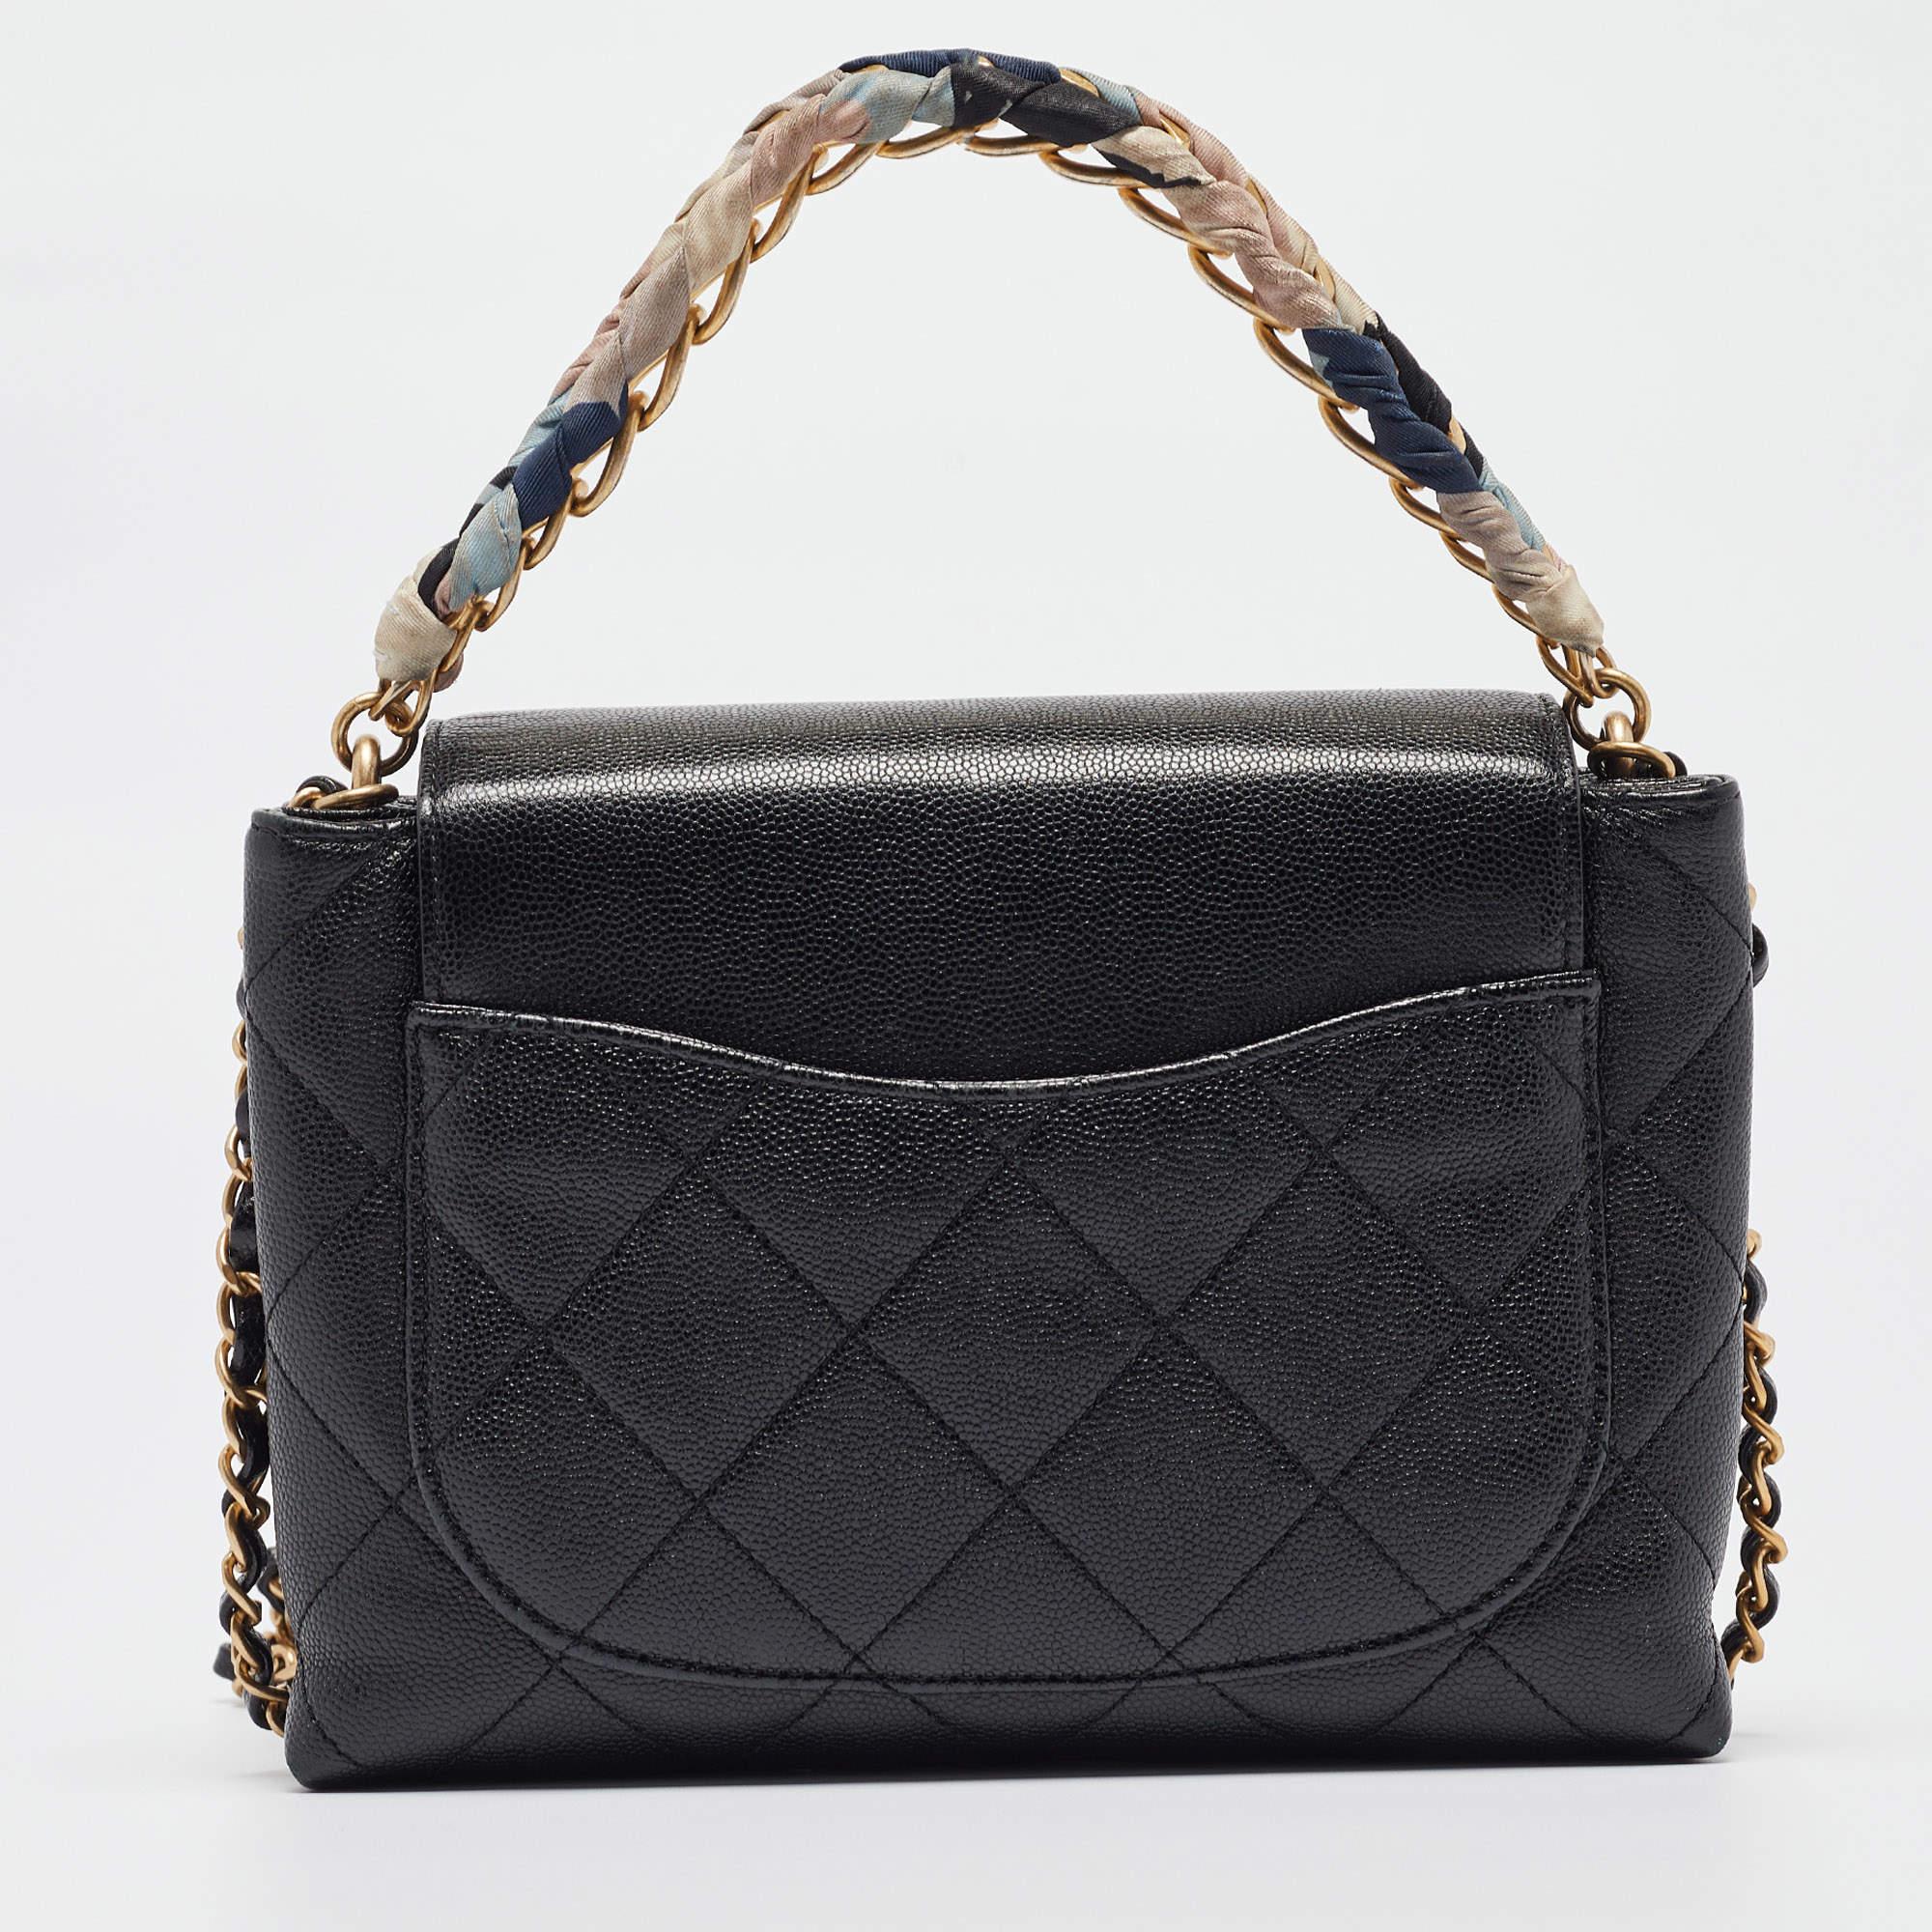 Chanel Black Quilted Leather CC Chain Scarf Top Handle Bag 8